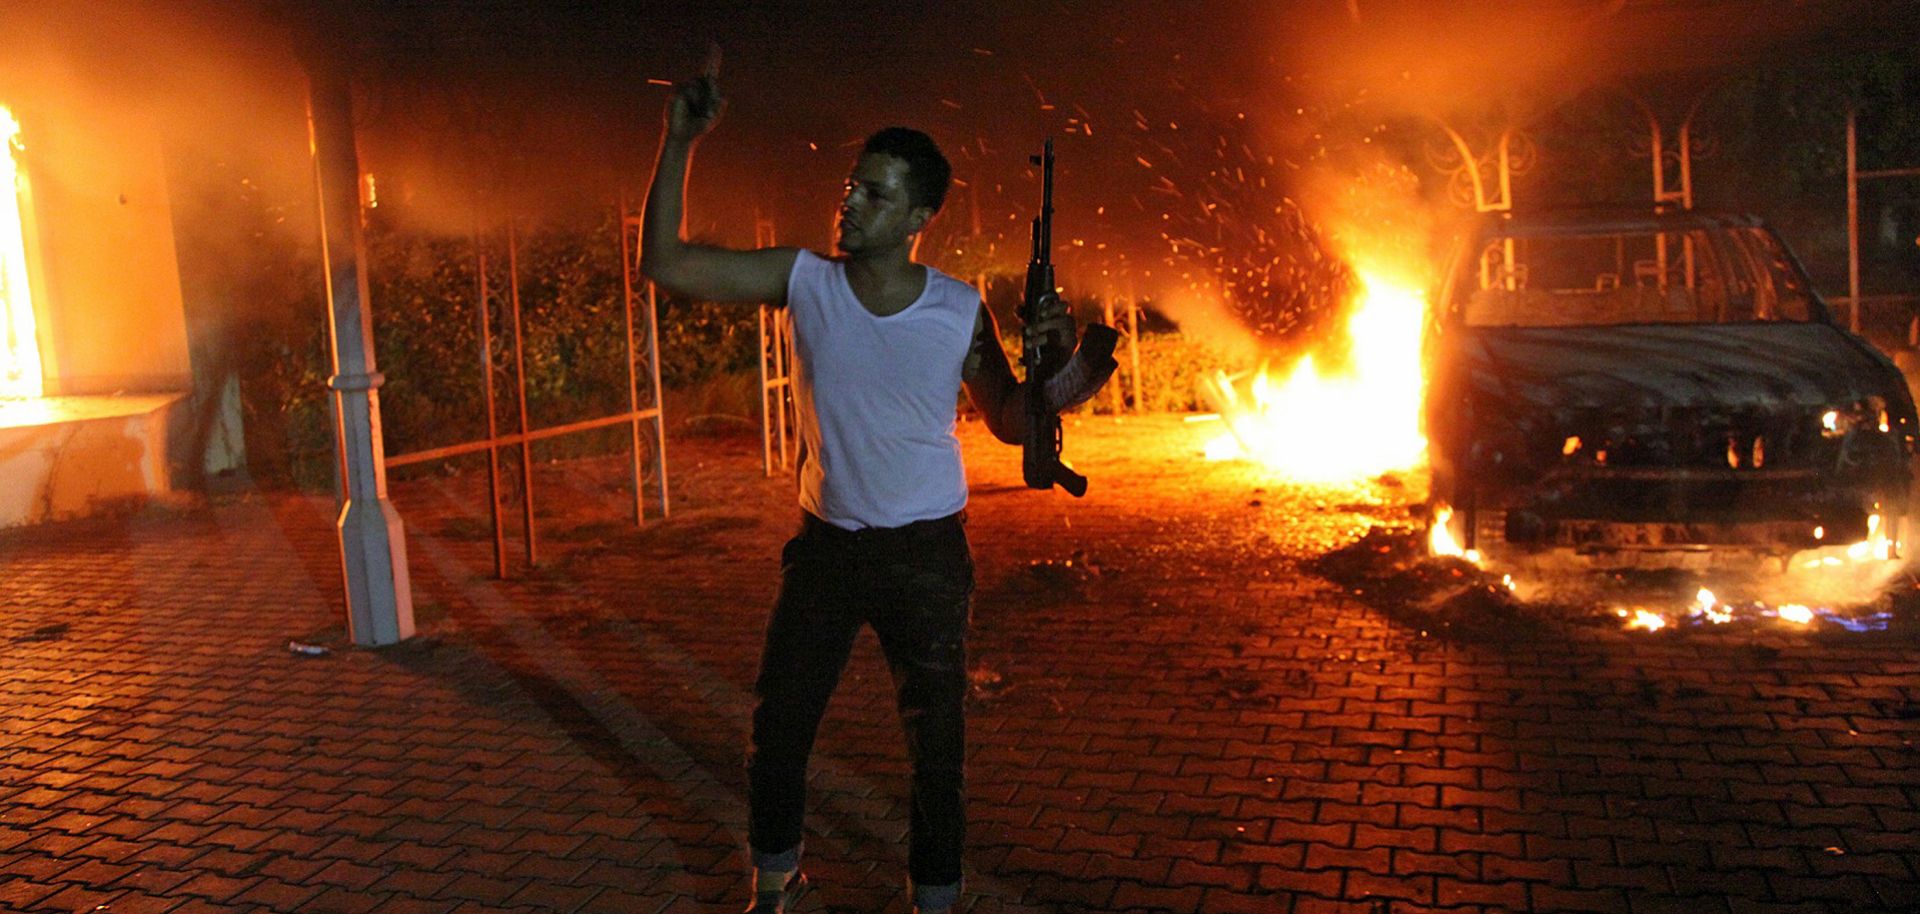 An armed man waves his rifle as buildings and cars are engulfed in flames after being set on fire inside the US consulate compound in Benghazi late on September 11, 2012.